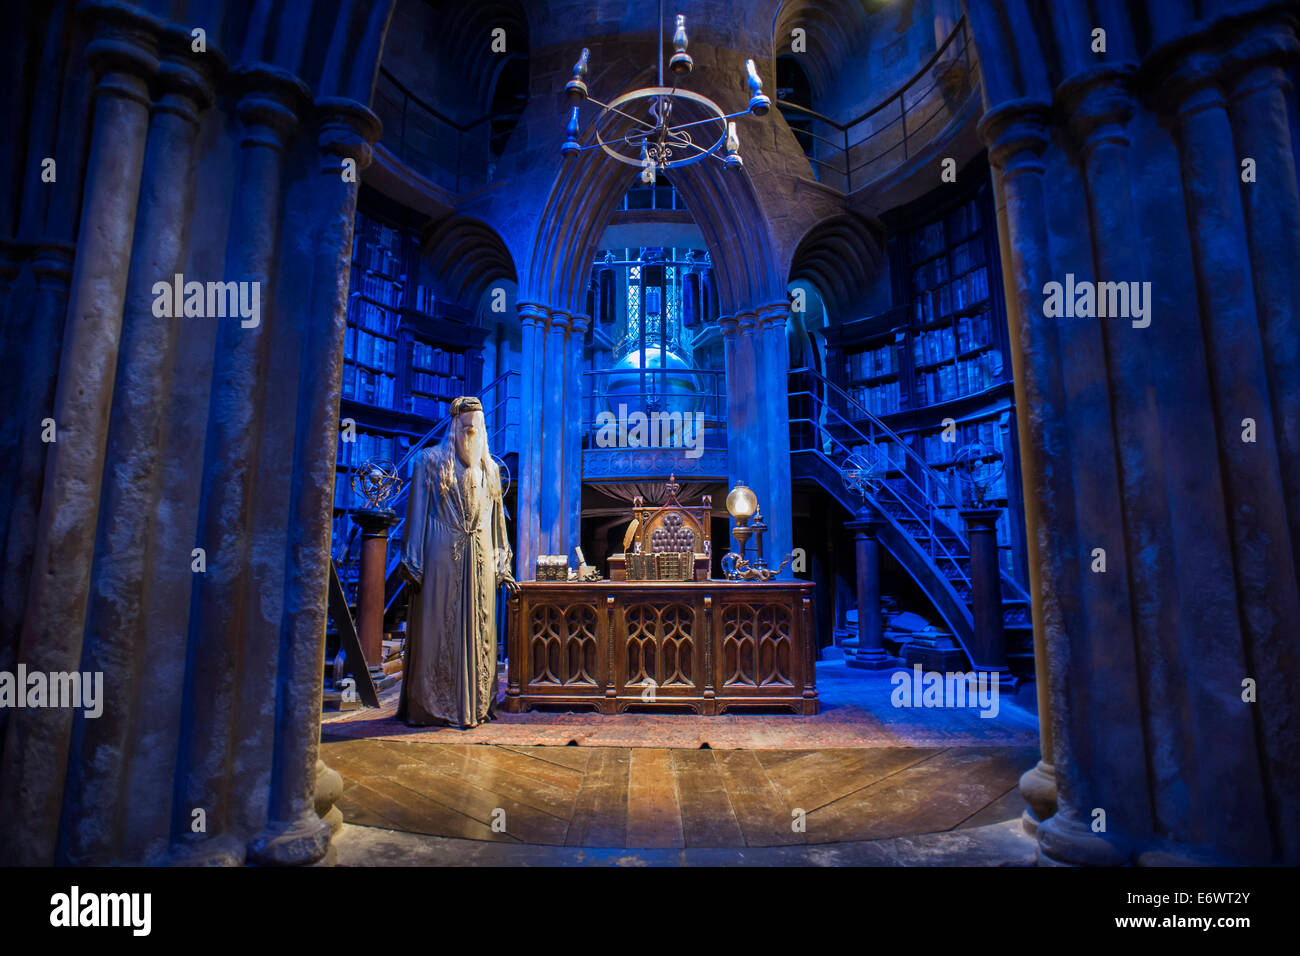 Warner Bros. Studio Tour London - The Making of Harry Potter preserves and showcases the iconic props. Stock Photo